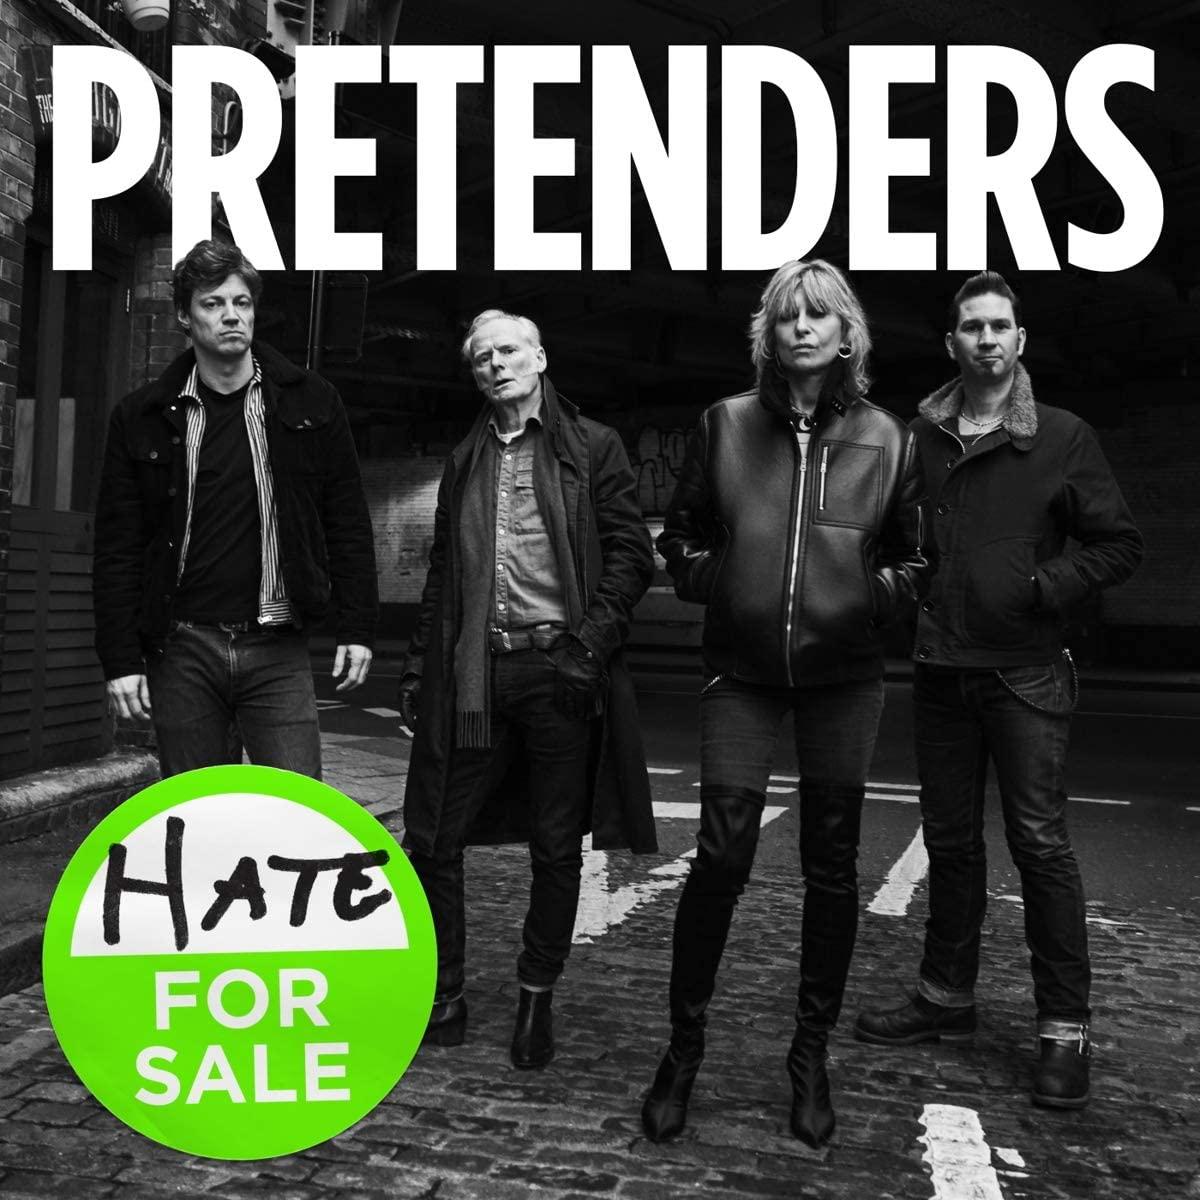 The Pretenders - Hate for Sale (2020) LP